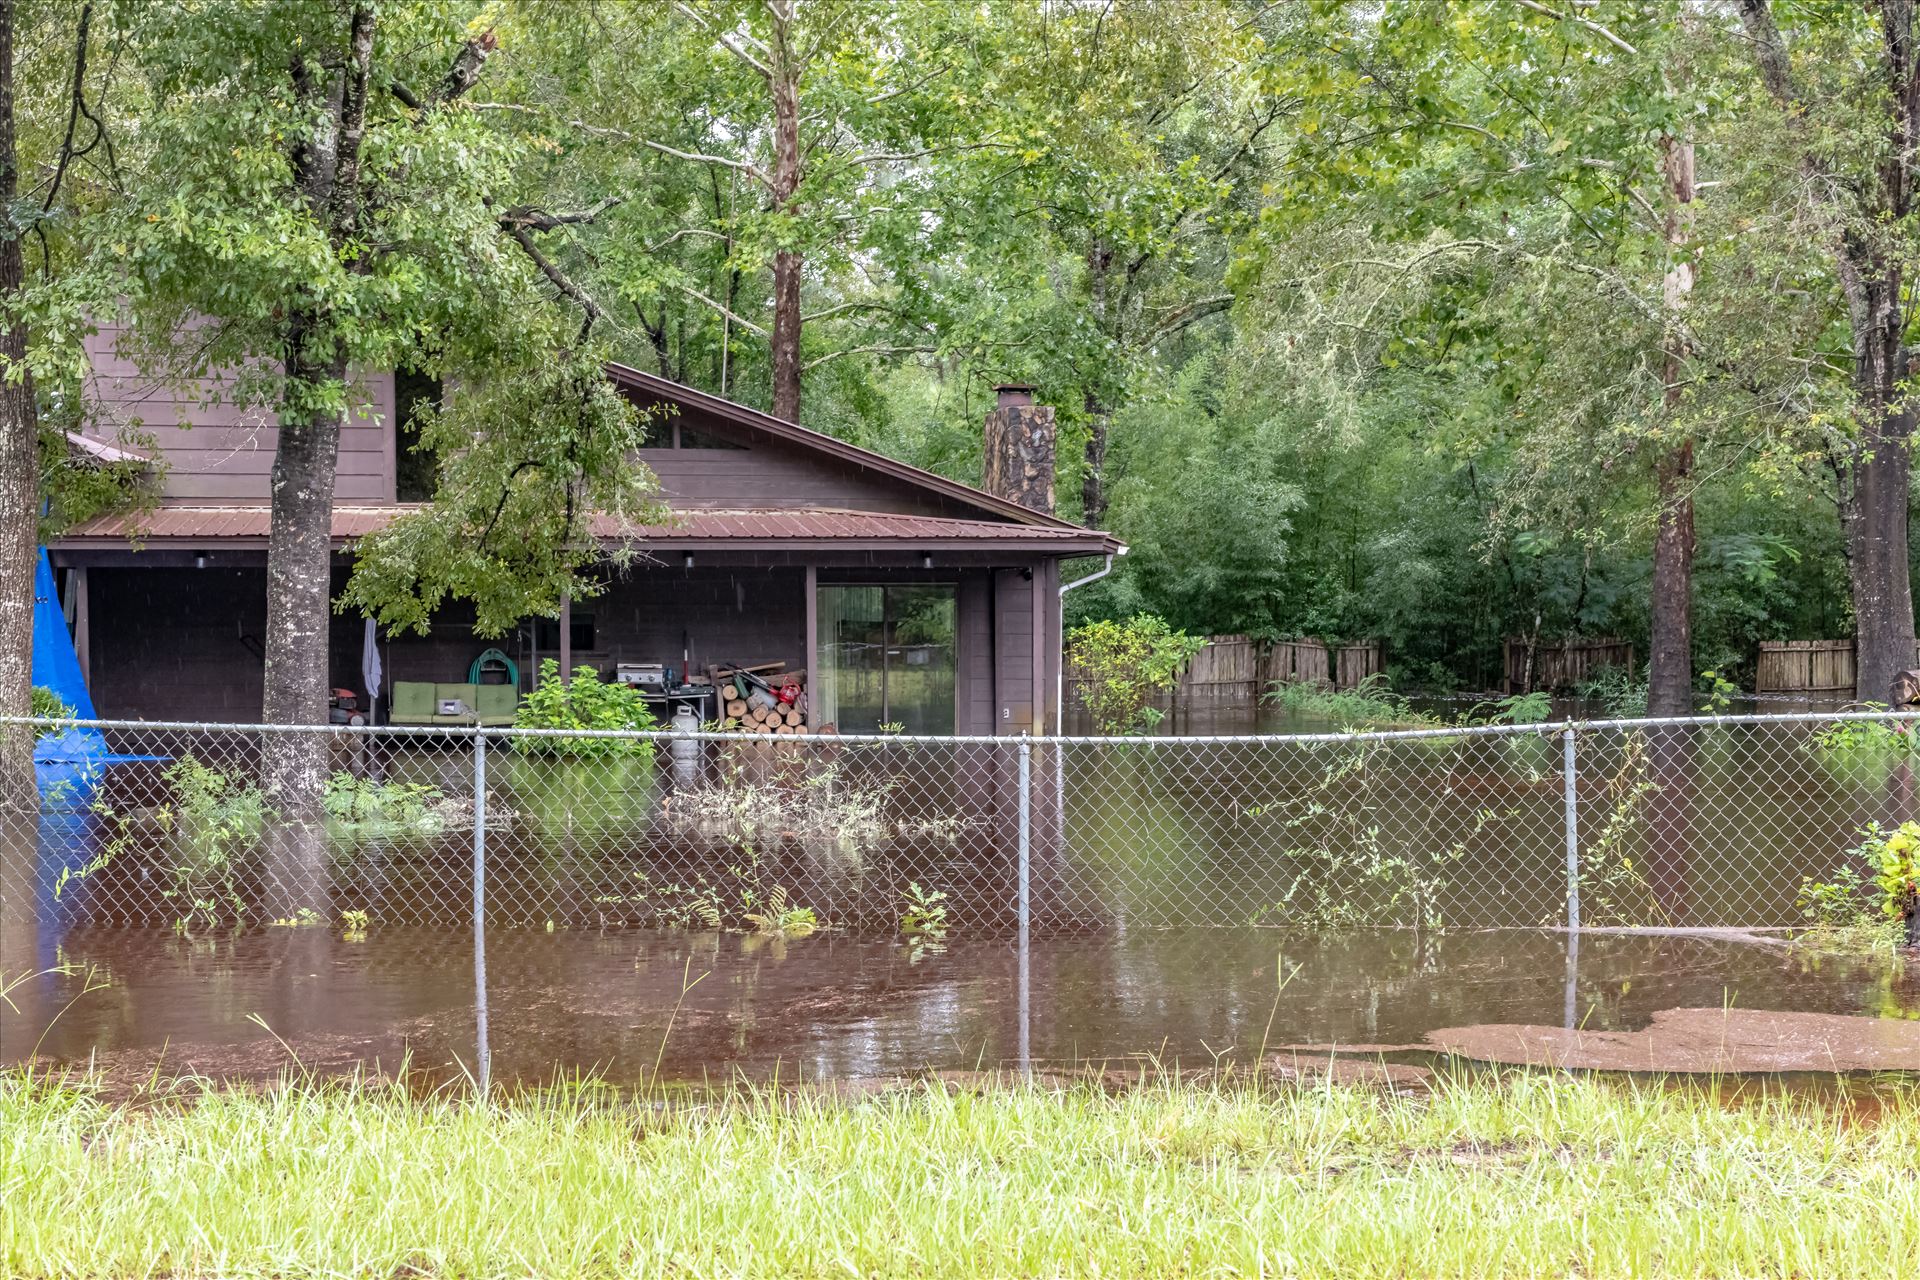 bear creek out of bank 2 August 02, 2018.jpg - August 02, 2018 heavy rains flooded many parts of Bay County, Florida. This photo is in the Bear Creek area. by Terry Kelly Photography